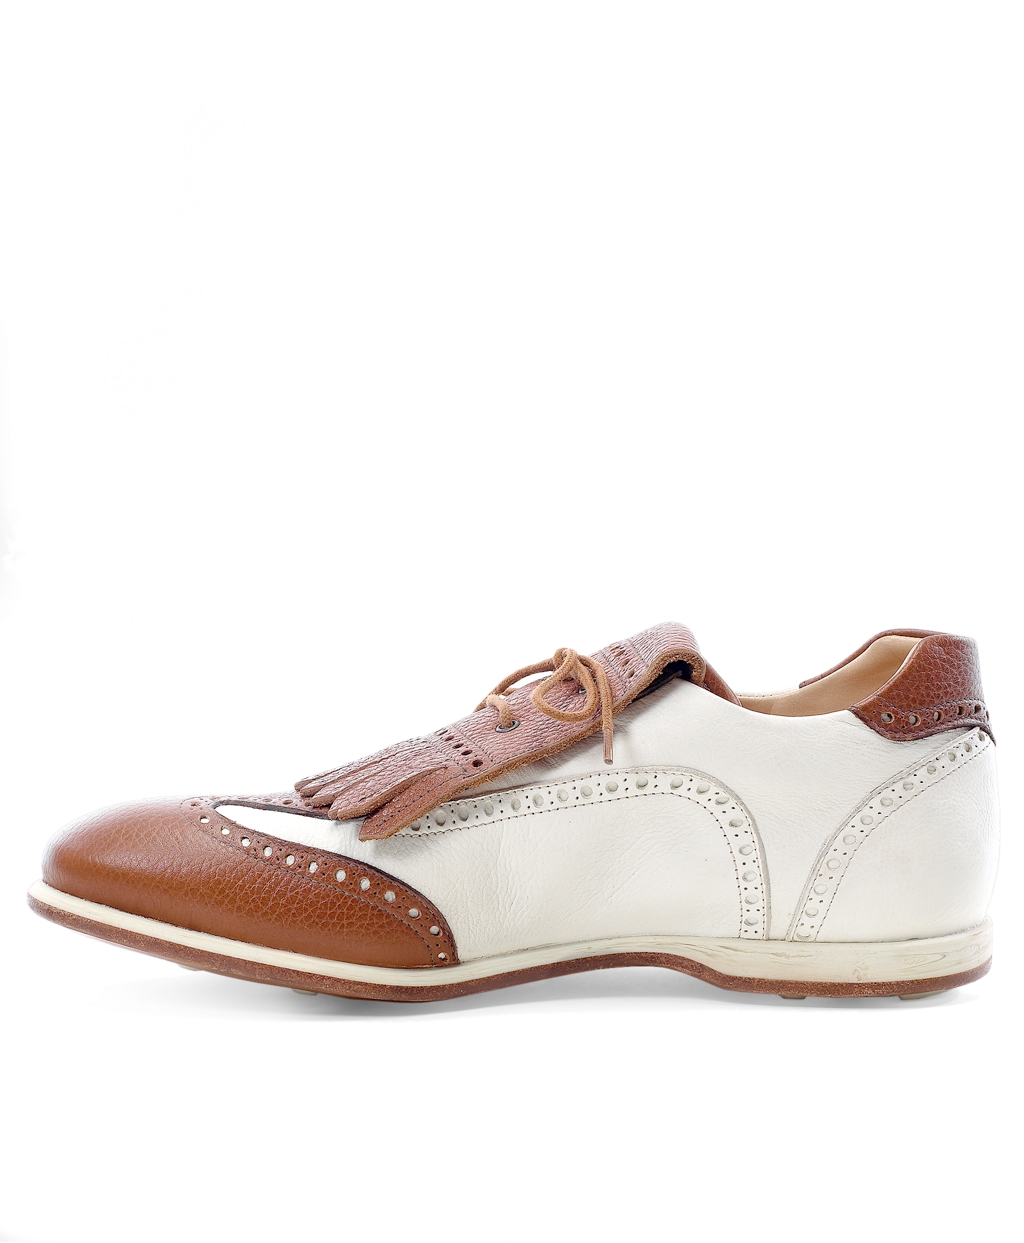 brooks brothers golf shoes